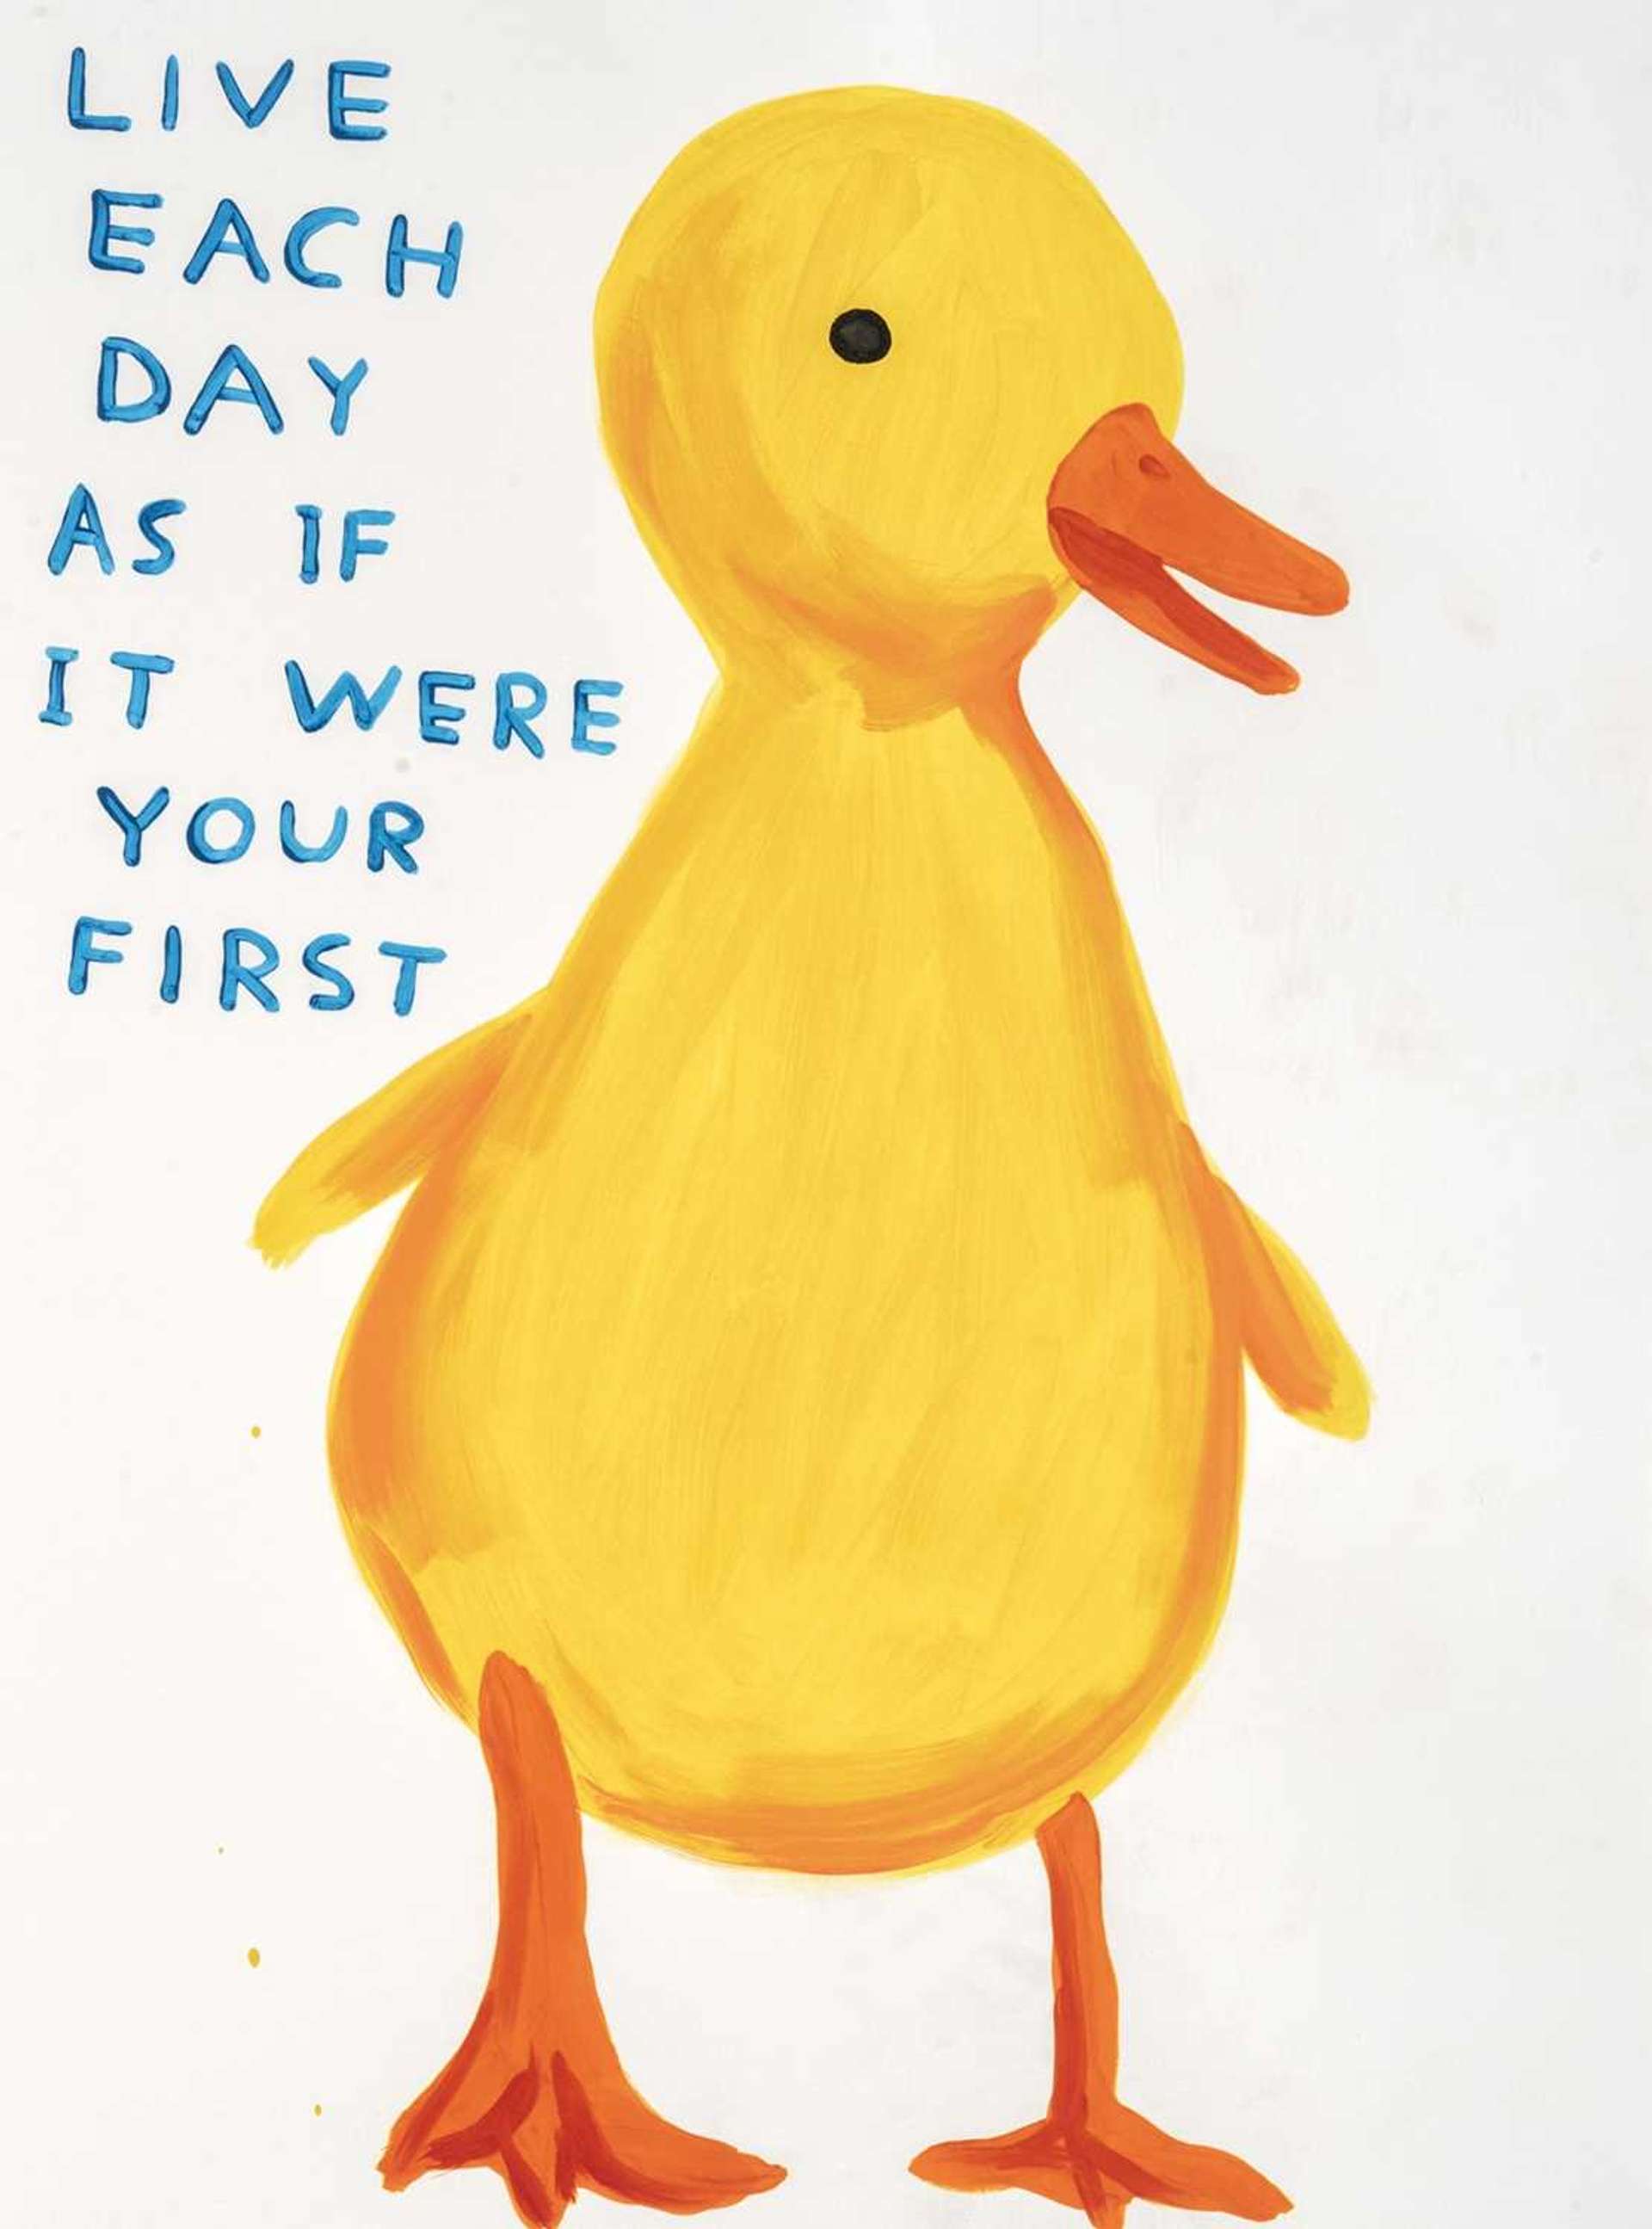 Live Each Day As If It Were Your First by David Shrigley - MyArtBroker